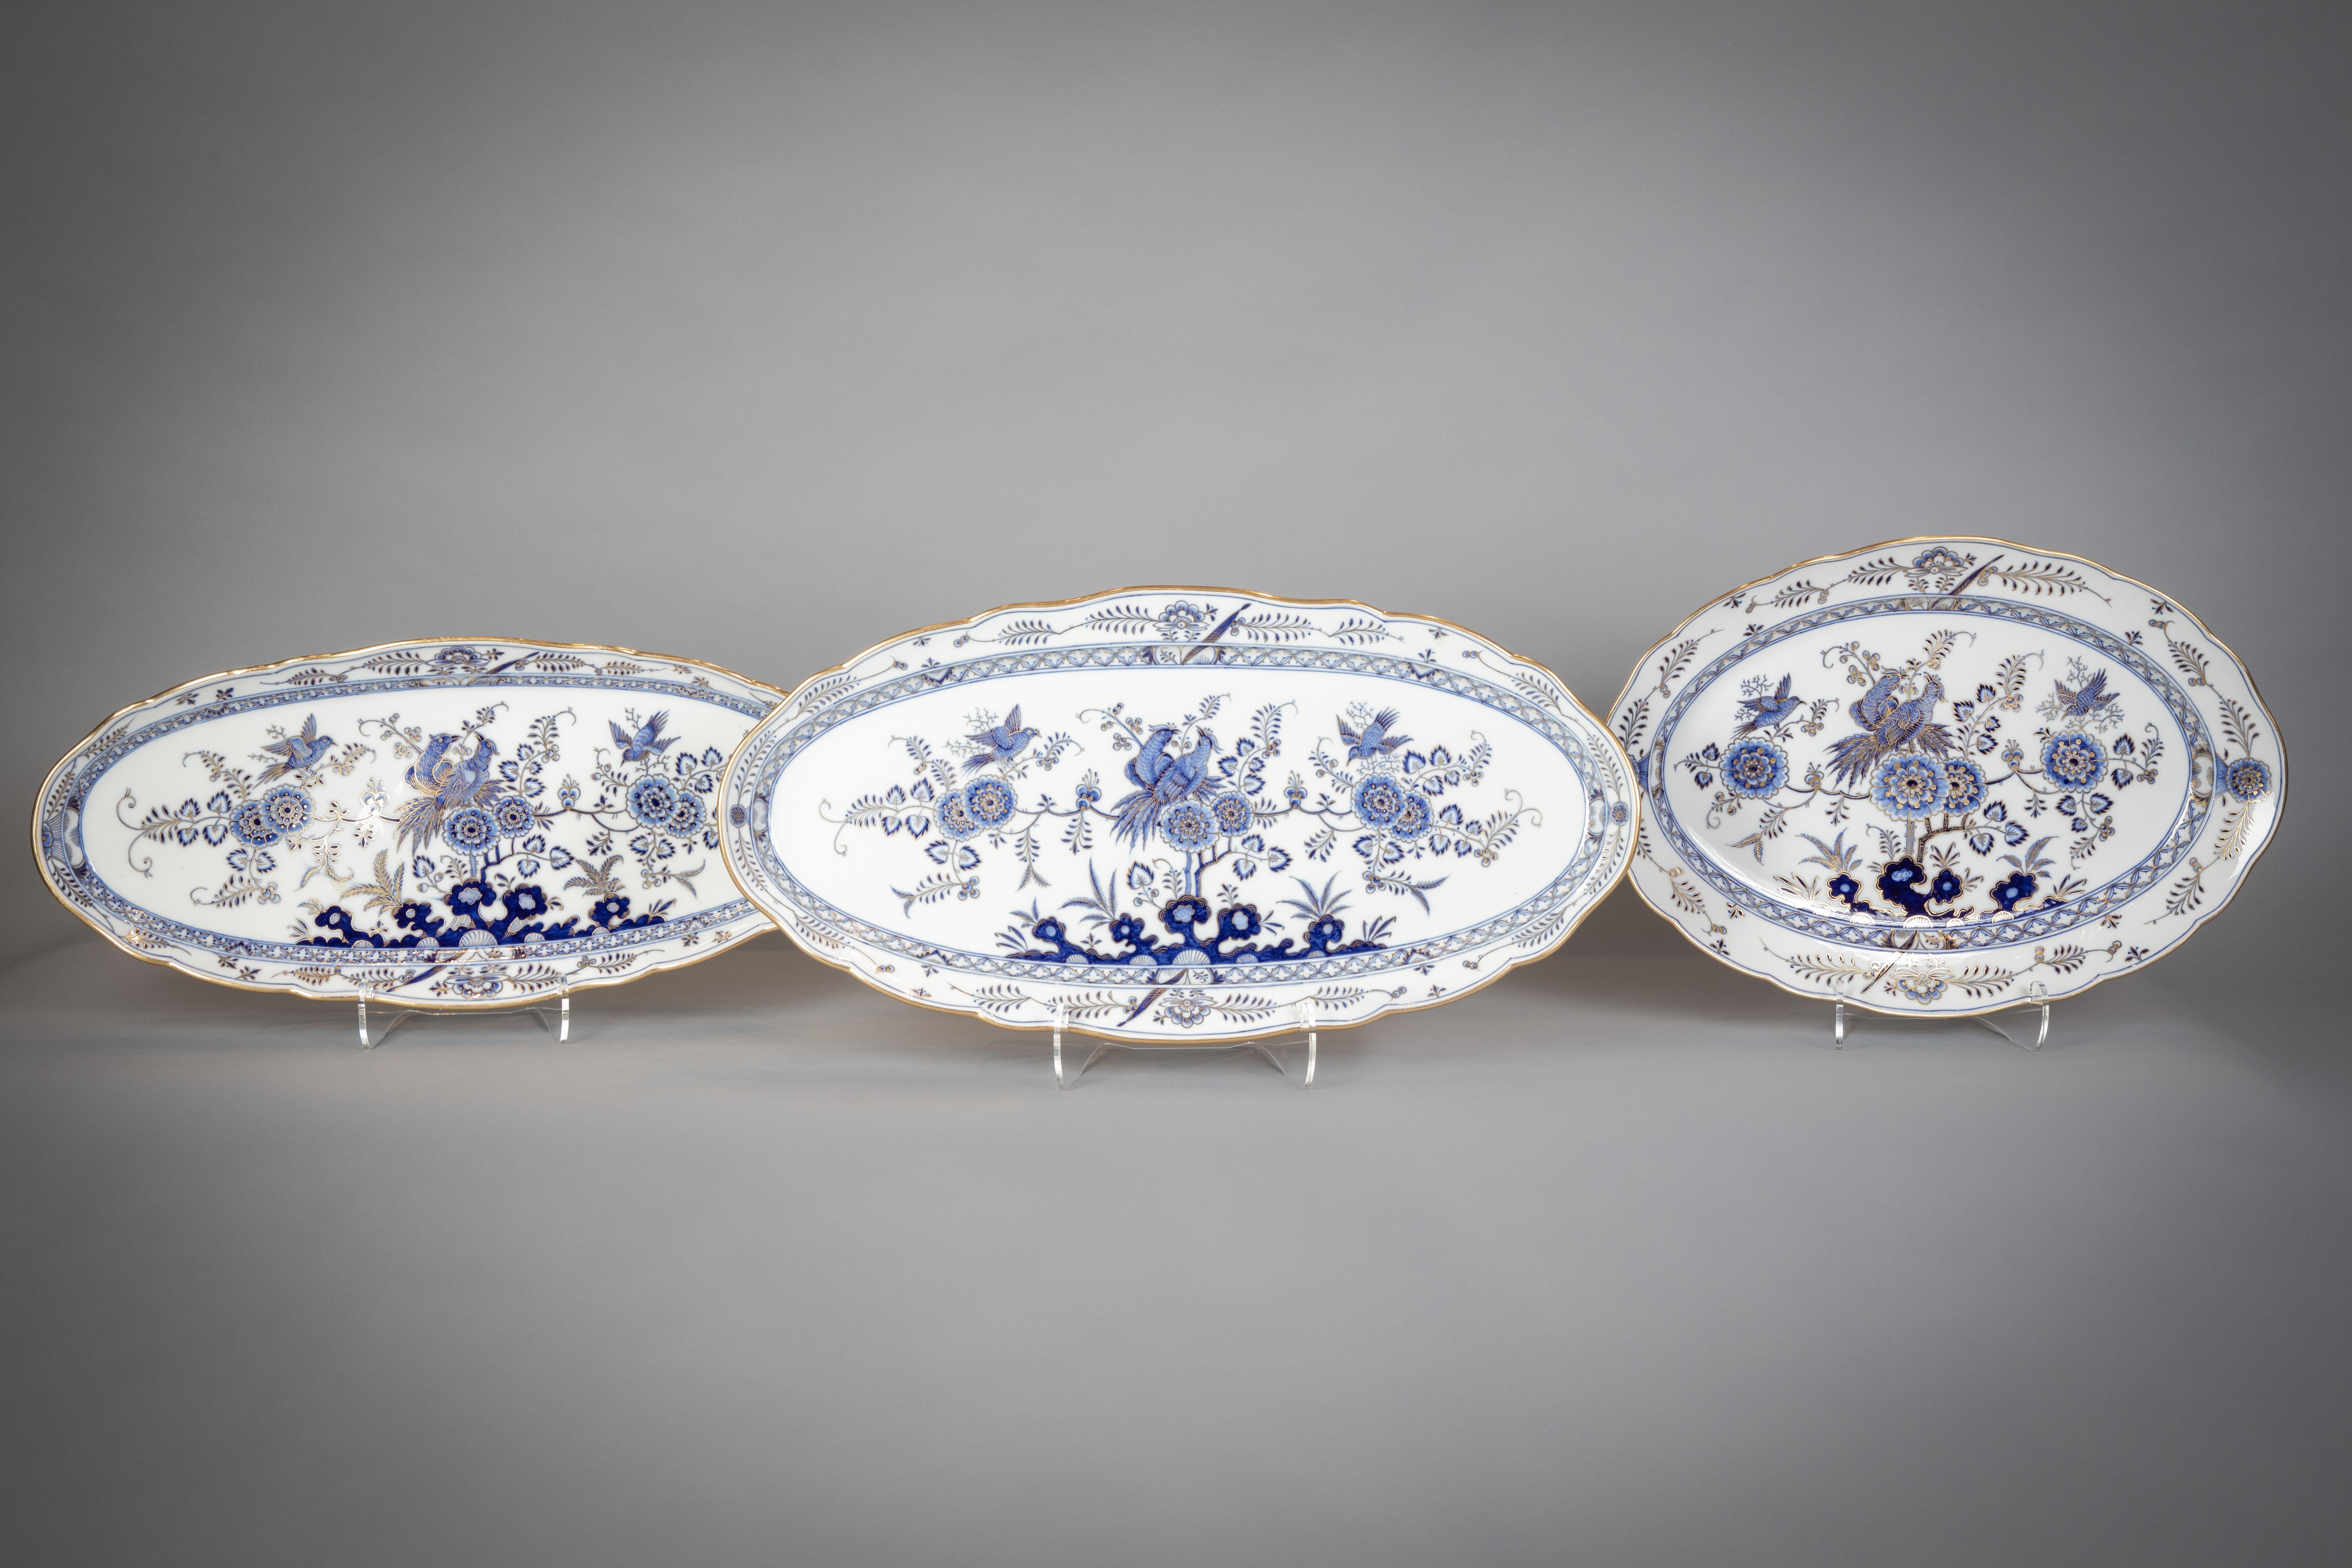 Each piece painted in underglaze-blue and heightened in gilding with an exotic bird perched upon peony branches, comprising: an oval soup tureen, cover and two stands, an 18